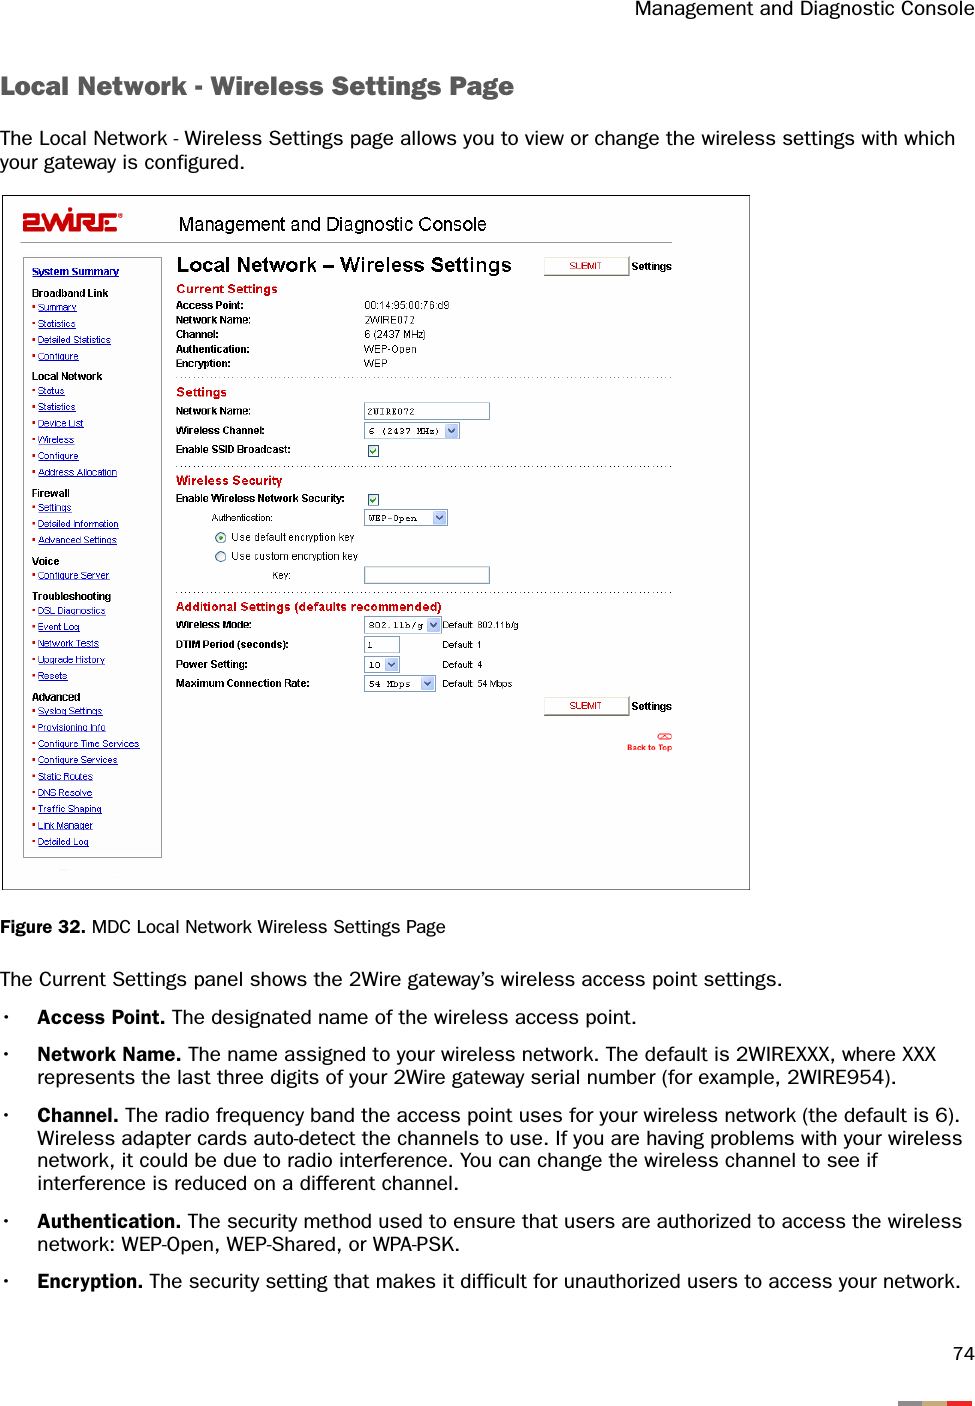 Management and Diagnostic Console74Local Network - Wireless Settings PageThe Local Network - Wireless Settings page allows you to view or change the wireless settings with which your gateway is configured.Figure 32. MDC Local Network Wireless Settings PageThe Current Settings panel shows the 2Wire gateway’s wireless access point settings.•Access Point. The designated name of the wireless access point.•Network Name. The name assigned to your wireless network. The default is 2WIREXXX, where XXX represents the last three digits of your 2Wire gateway serial number (for example, 2WIRE954).•Channel. The radio frequency band the access point uses for your wireless network (the default is 6). Wireless adapter cards auto-detect the channels to use. If you are having problems with your wireless network, it could be due to radio interference. You can change the wireless channel to see if interference is reduced on a different channel.•Authentication. The security method used to ensure that users are authorized to access the wireless network: WEP-Open, WEP-Shared, or WPA-PSK.•Encryption. The security setting that makes it difficult for unauthorized users to access your network.